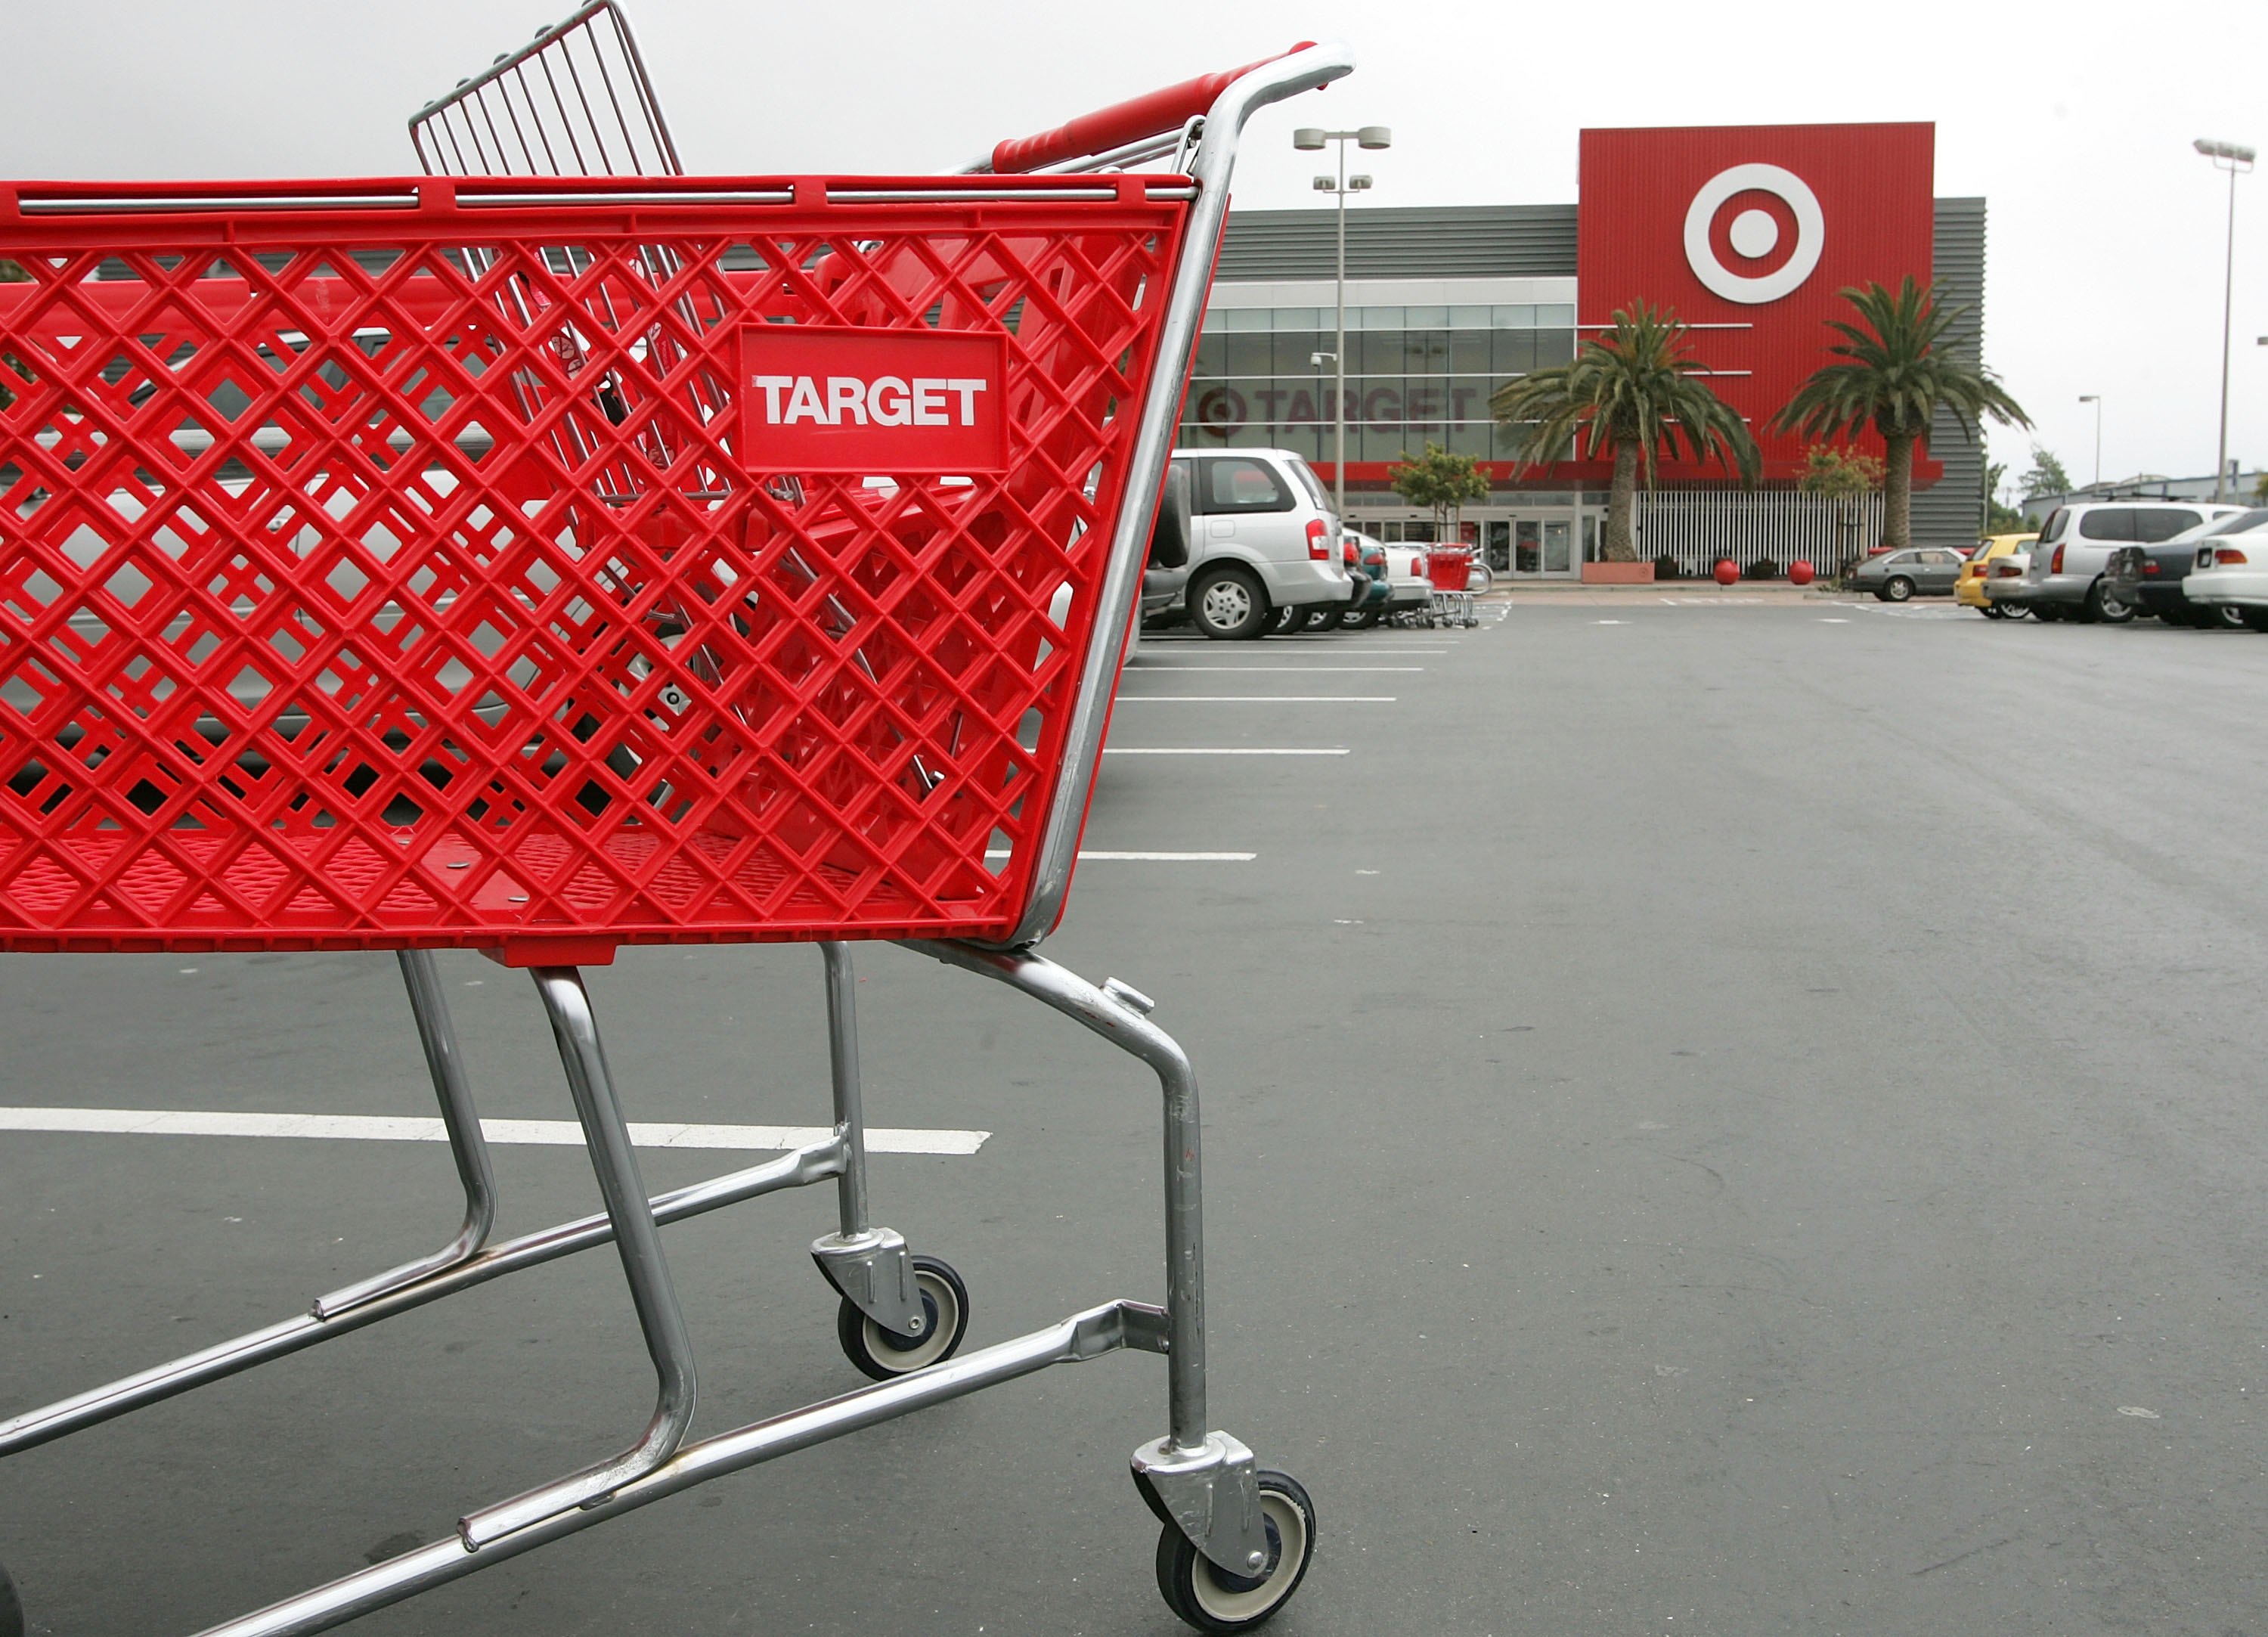 Why Conservative Christians Are Vowing to Boycott Target